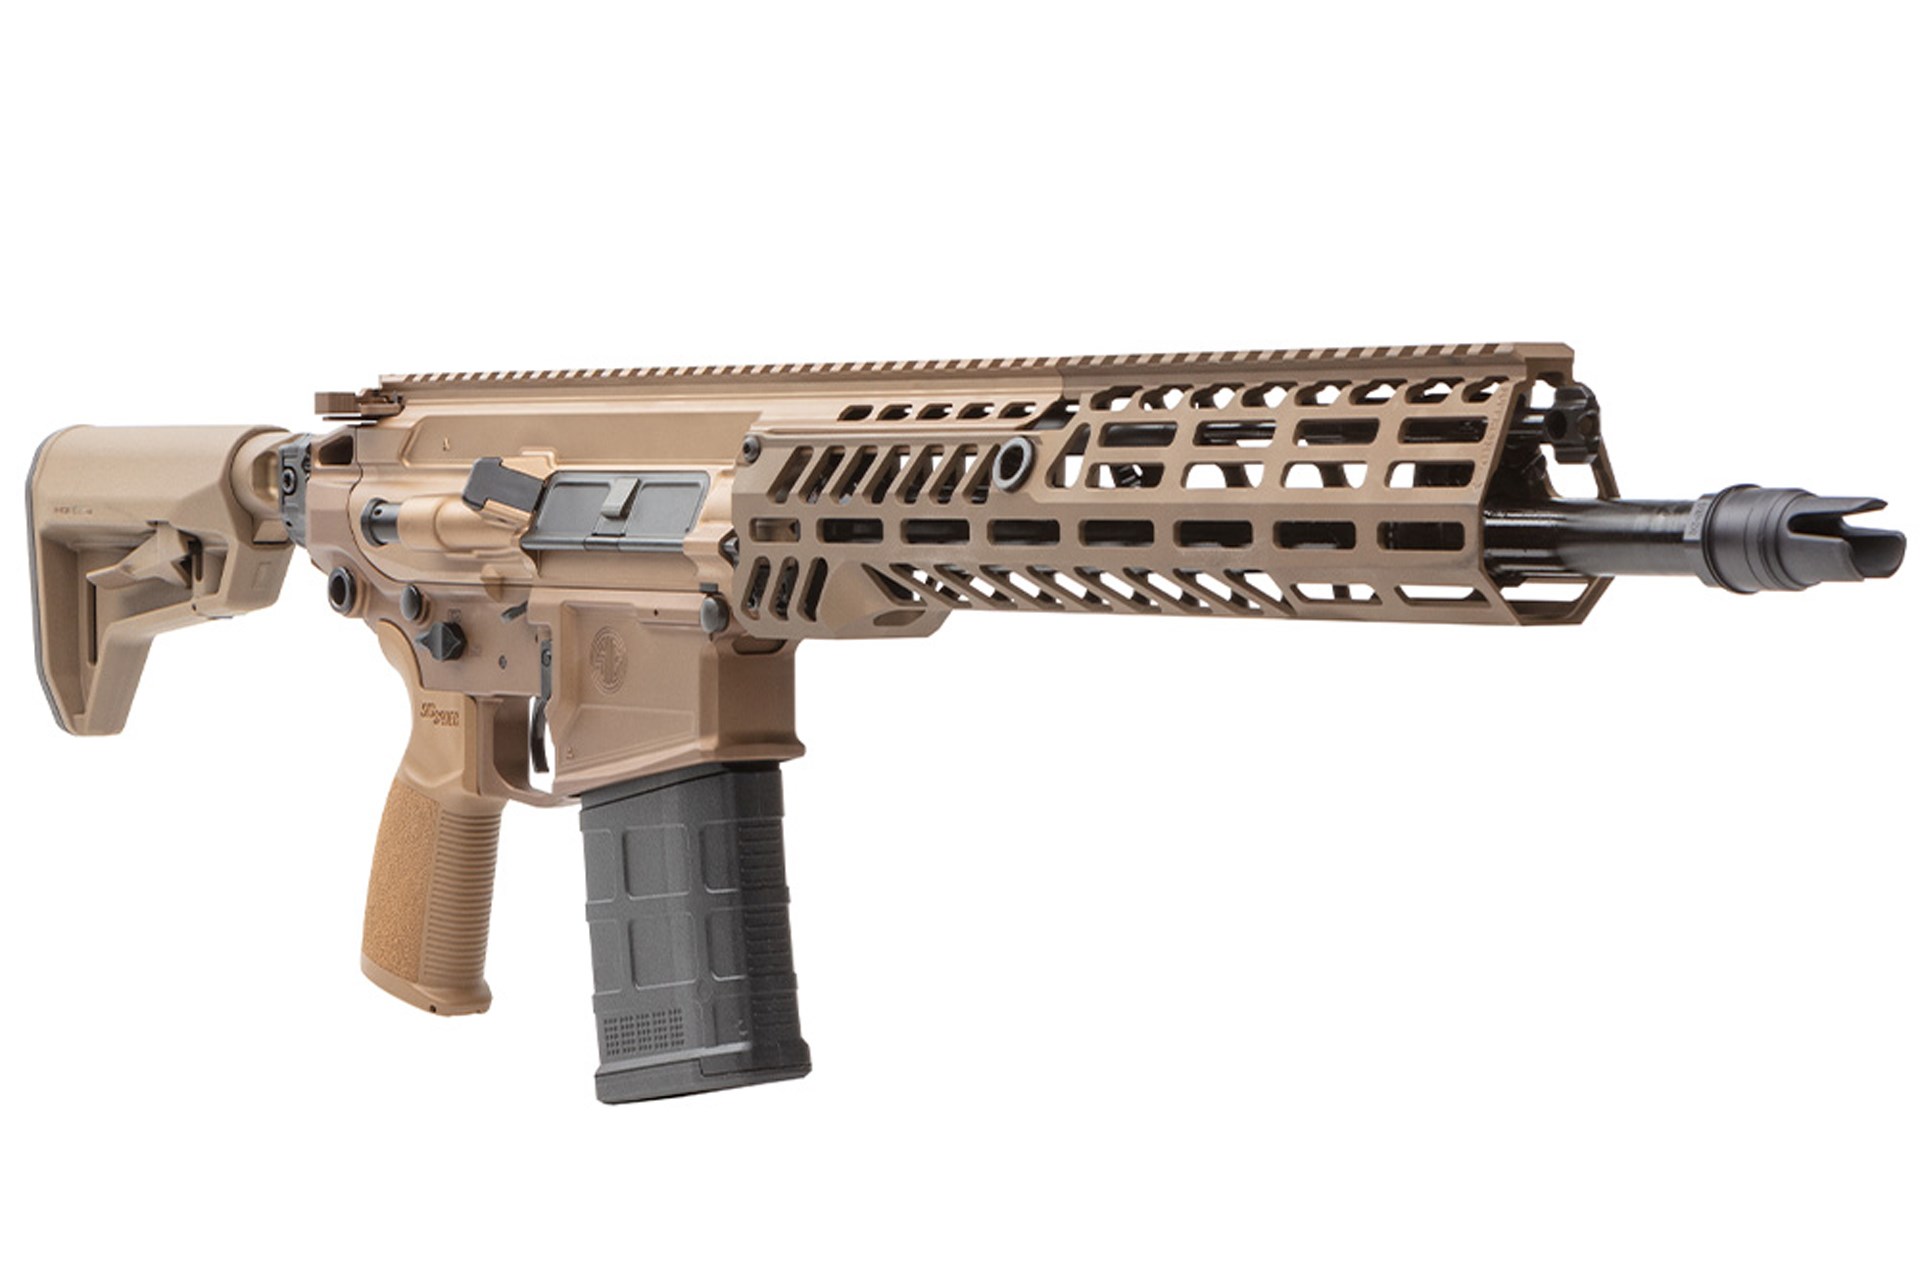 Right side of the SIG Sauer MCX-Spear, showing the M-Lok handguard and suppressor QD mount.